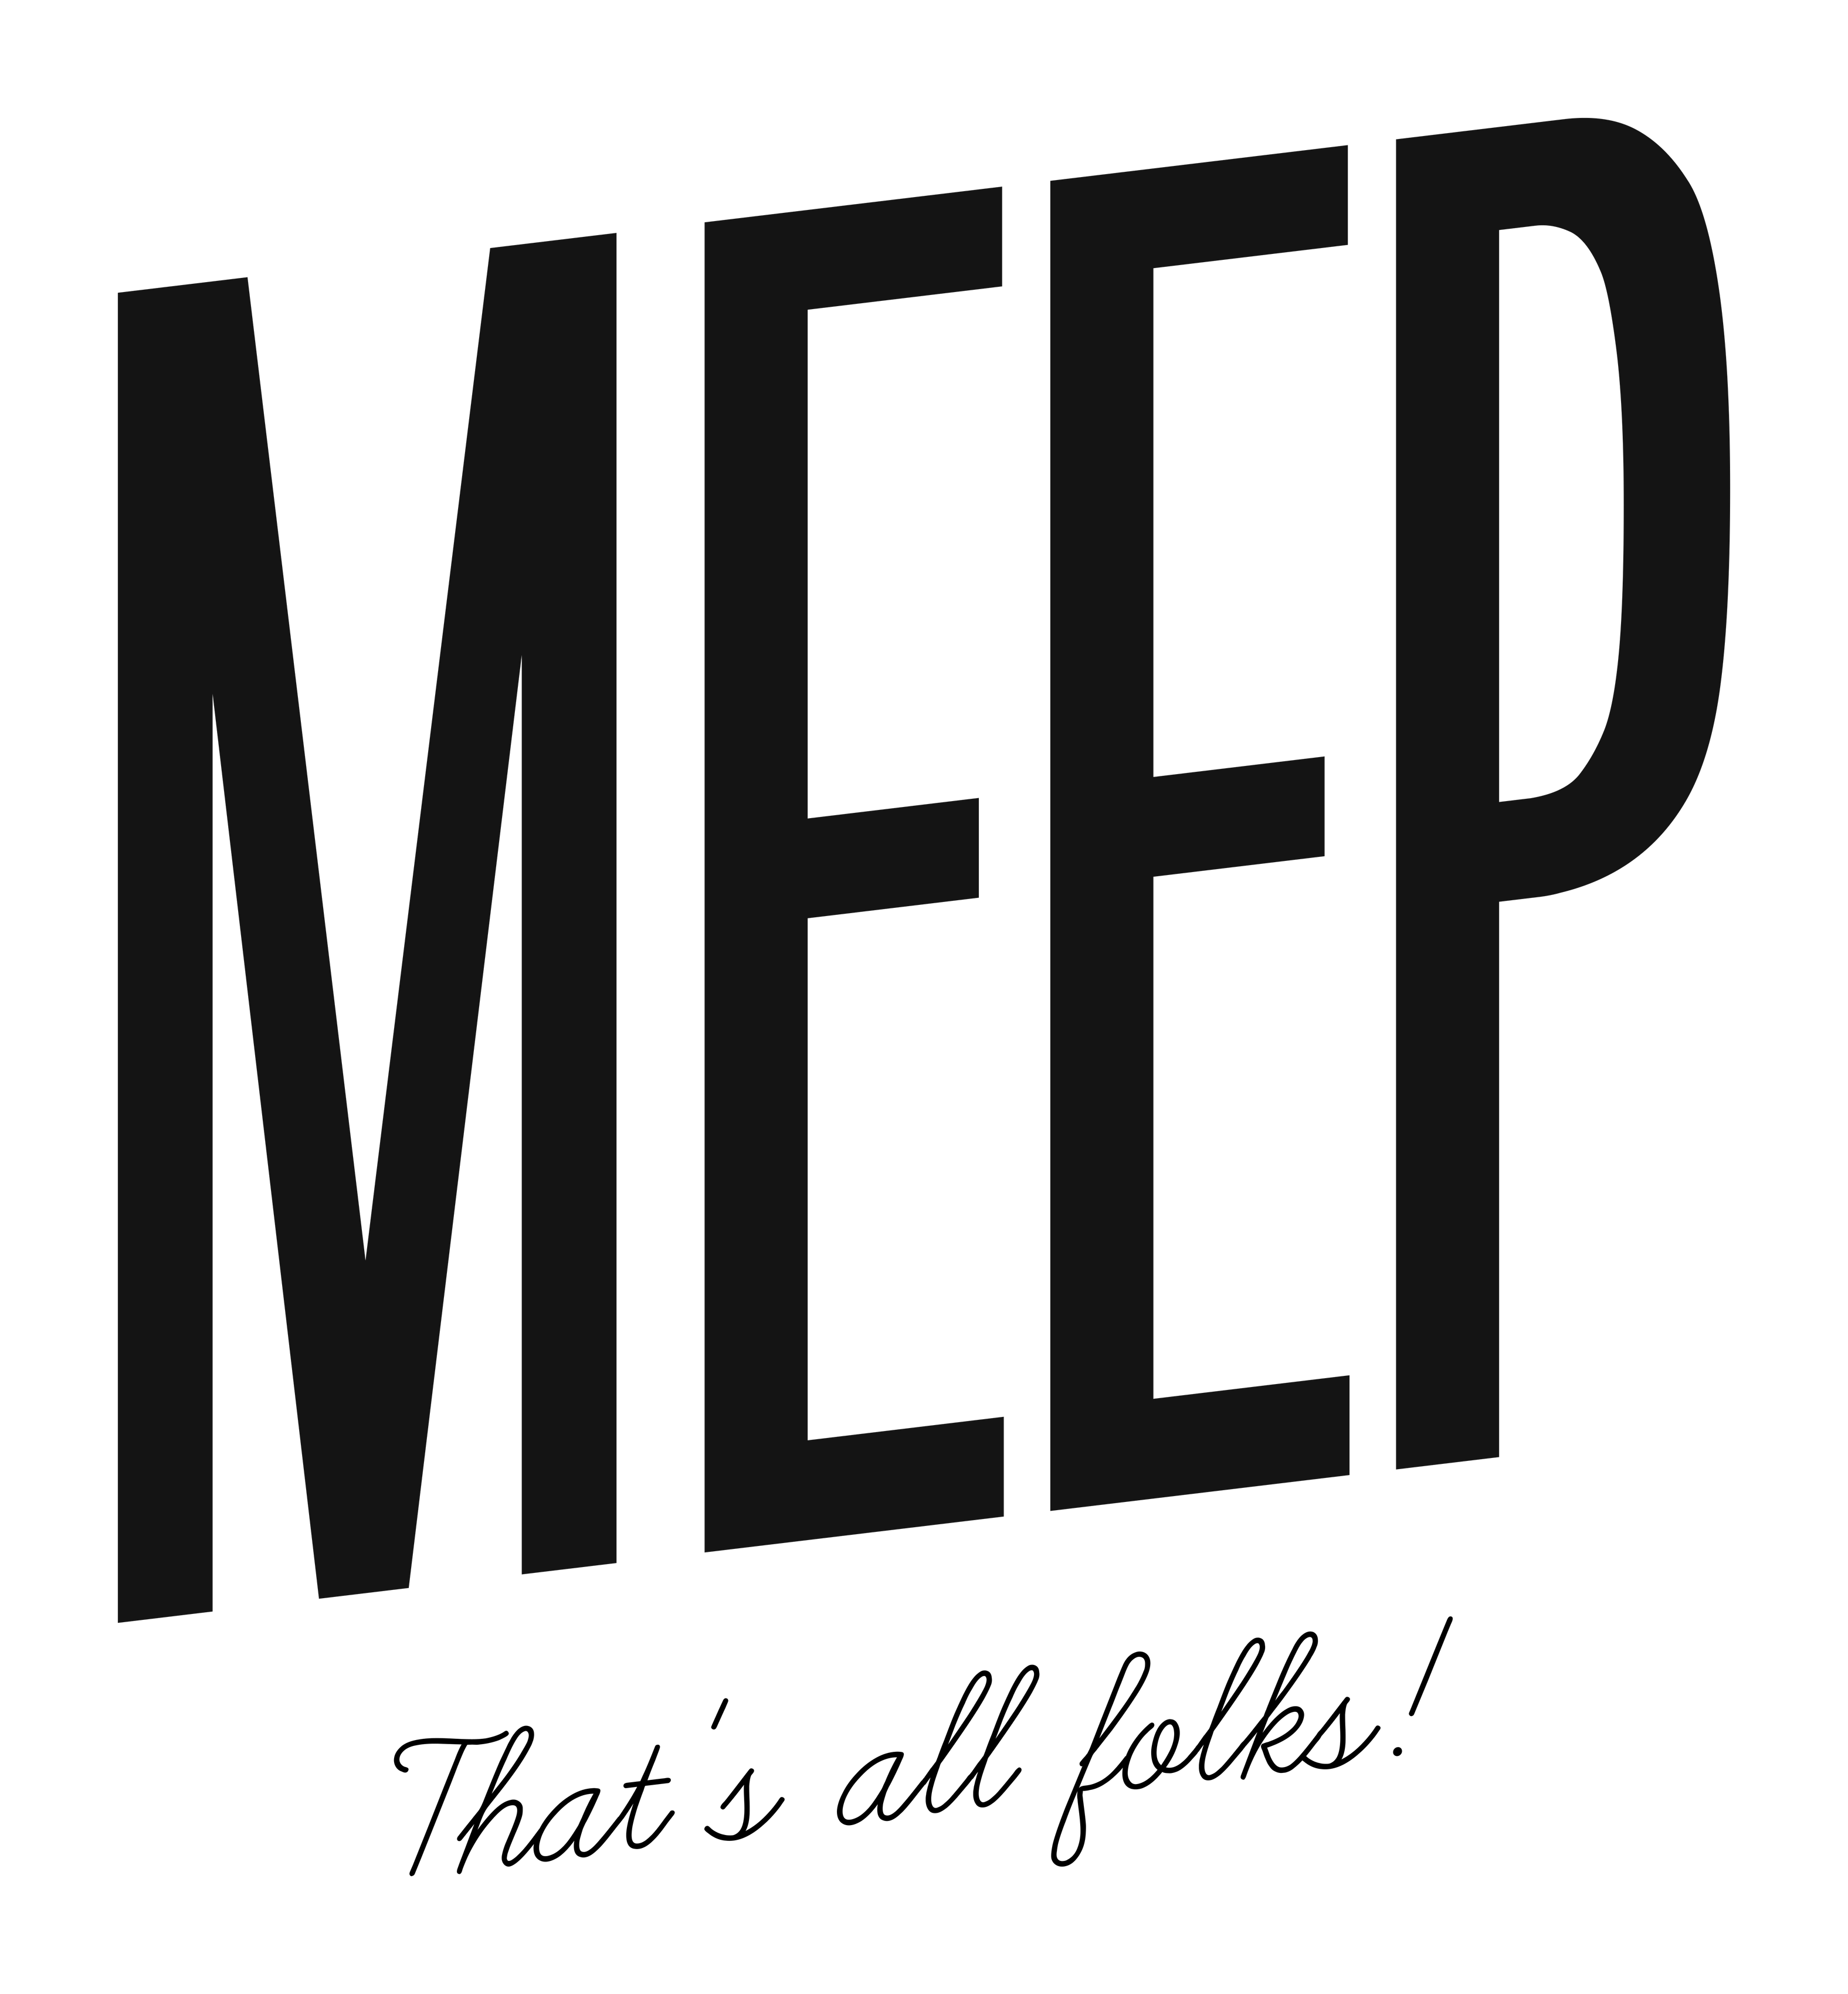 Meep - That's all folks!